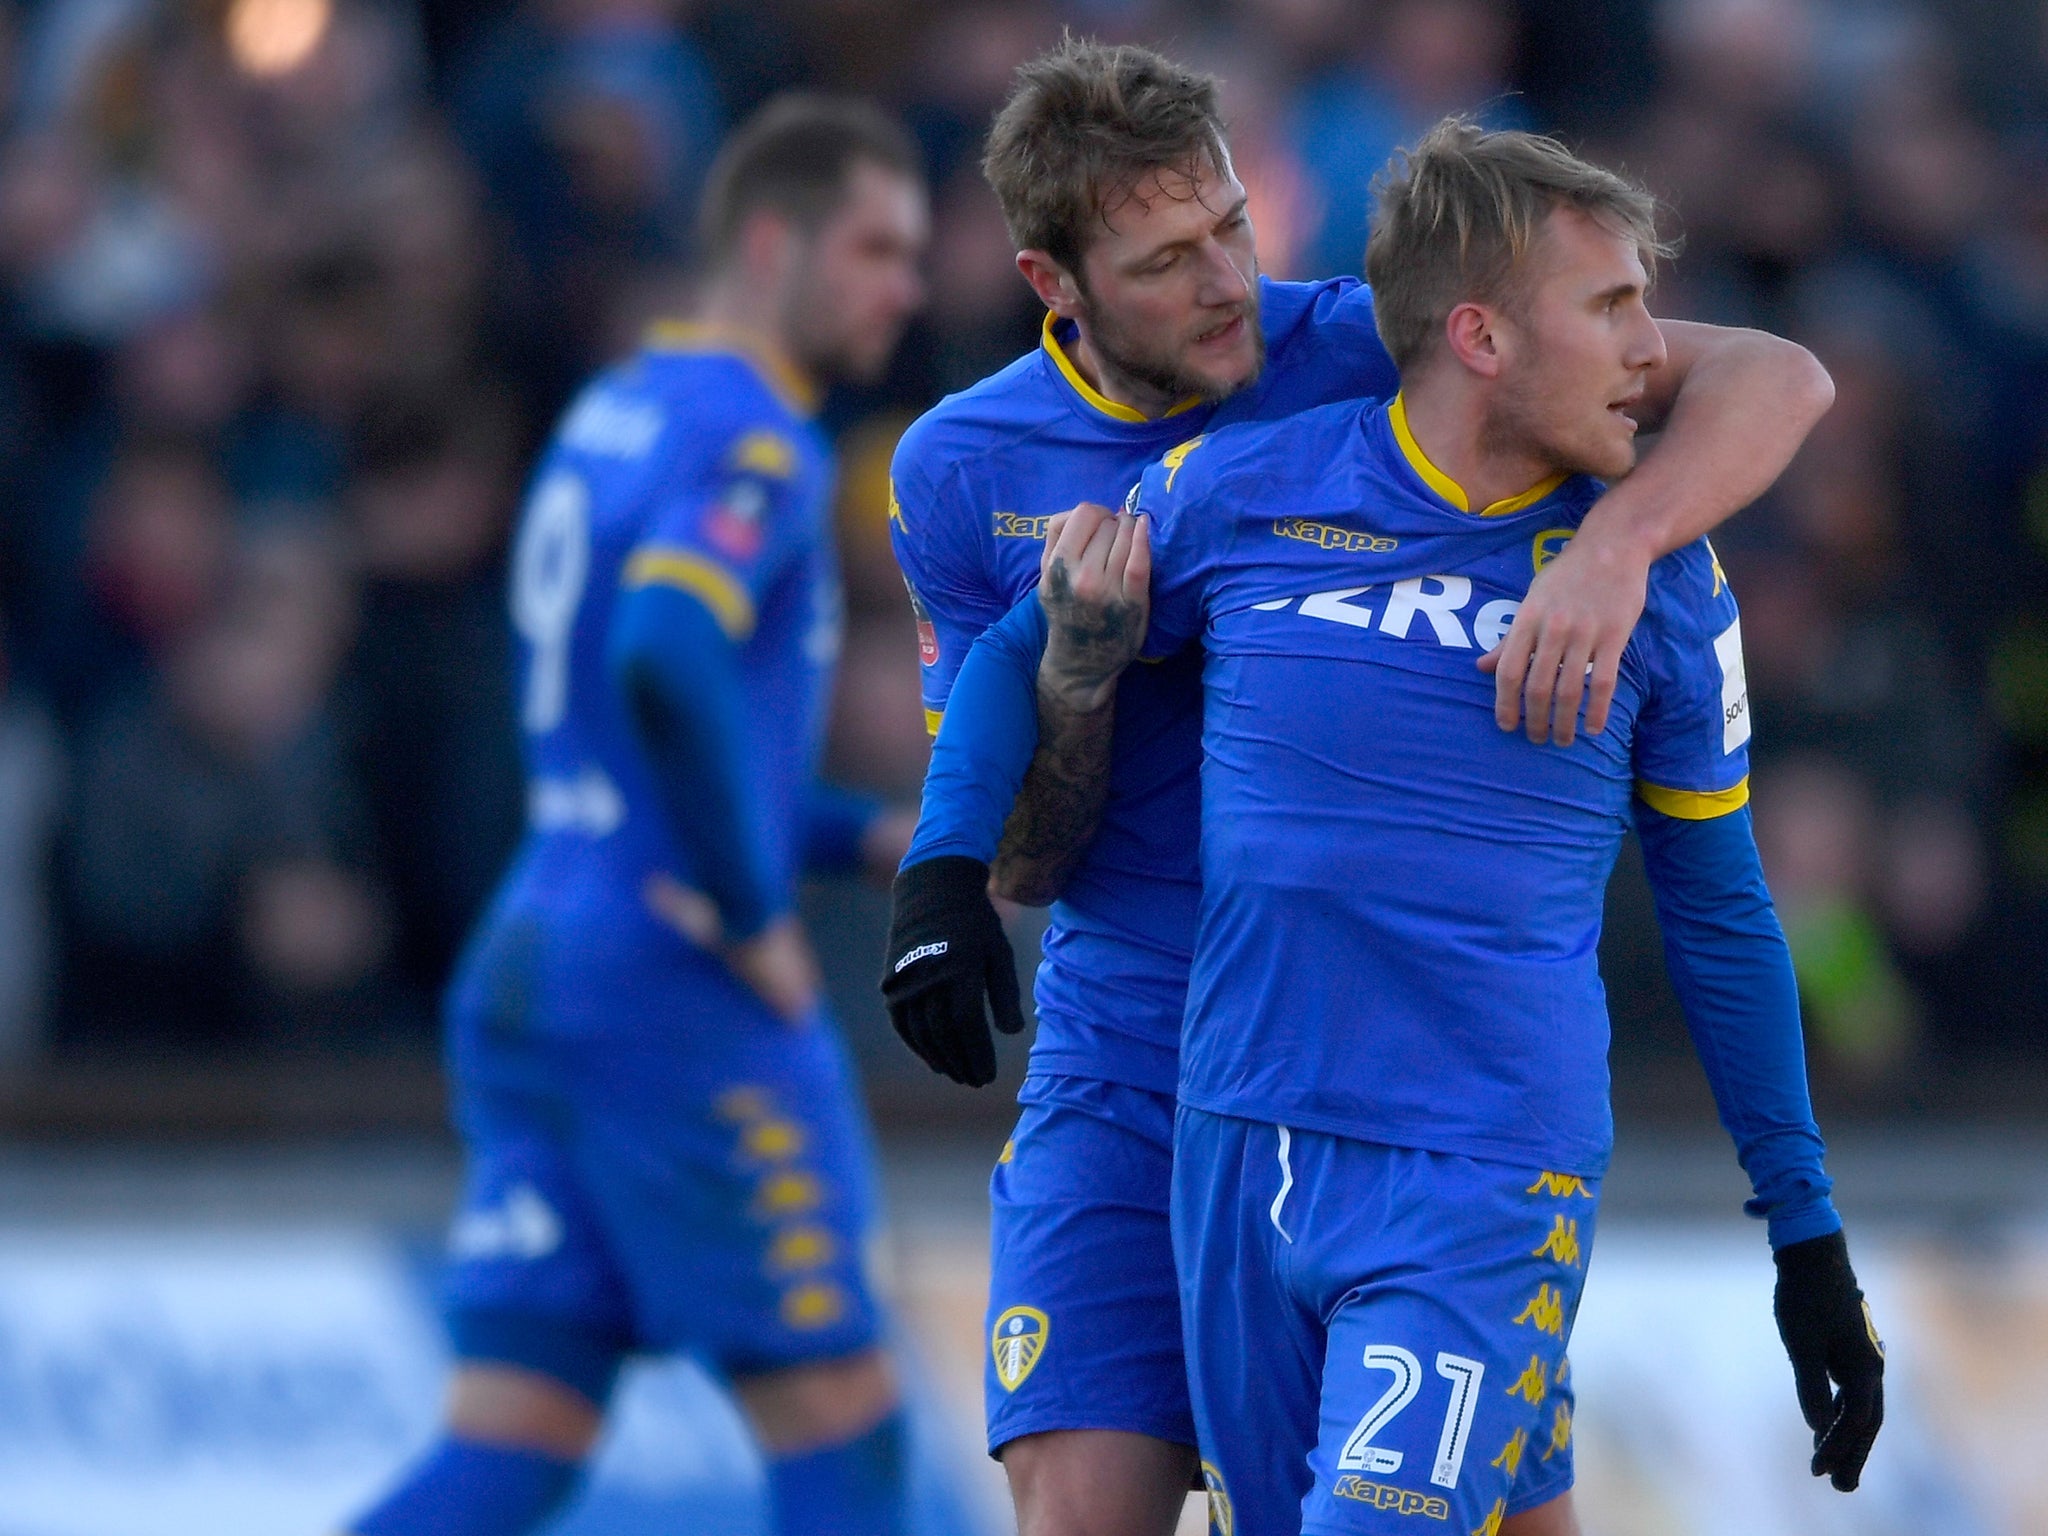 Samuel Saiz was sent off during Leeds' 2-1 FA Cup defeat by Newport County on Sunday